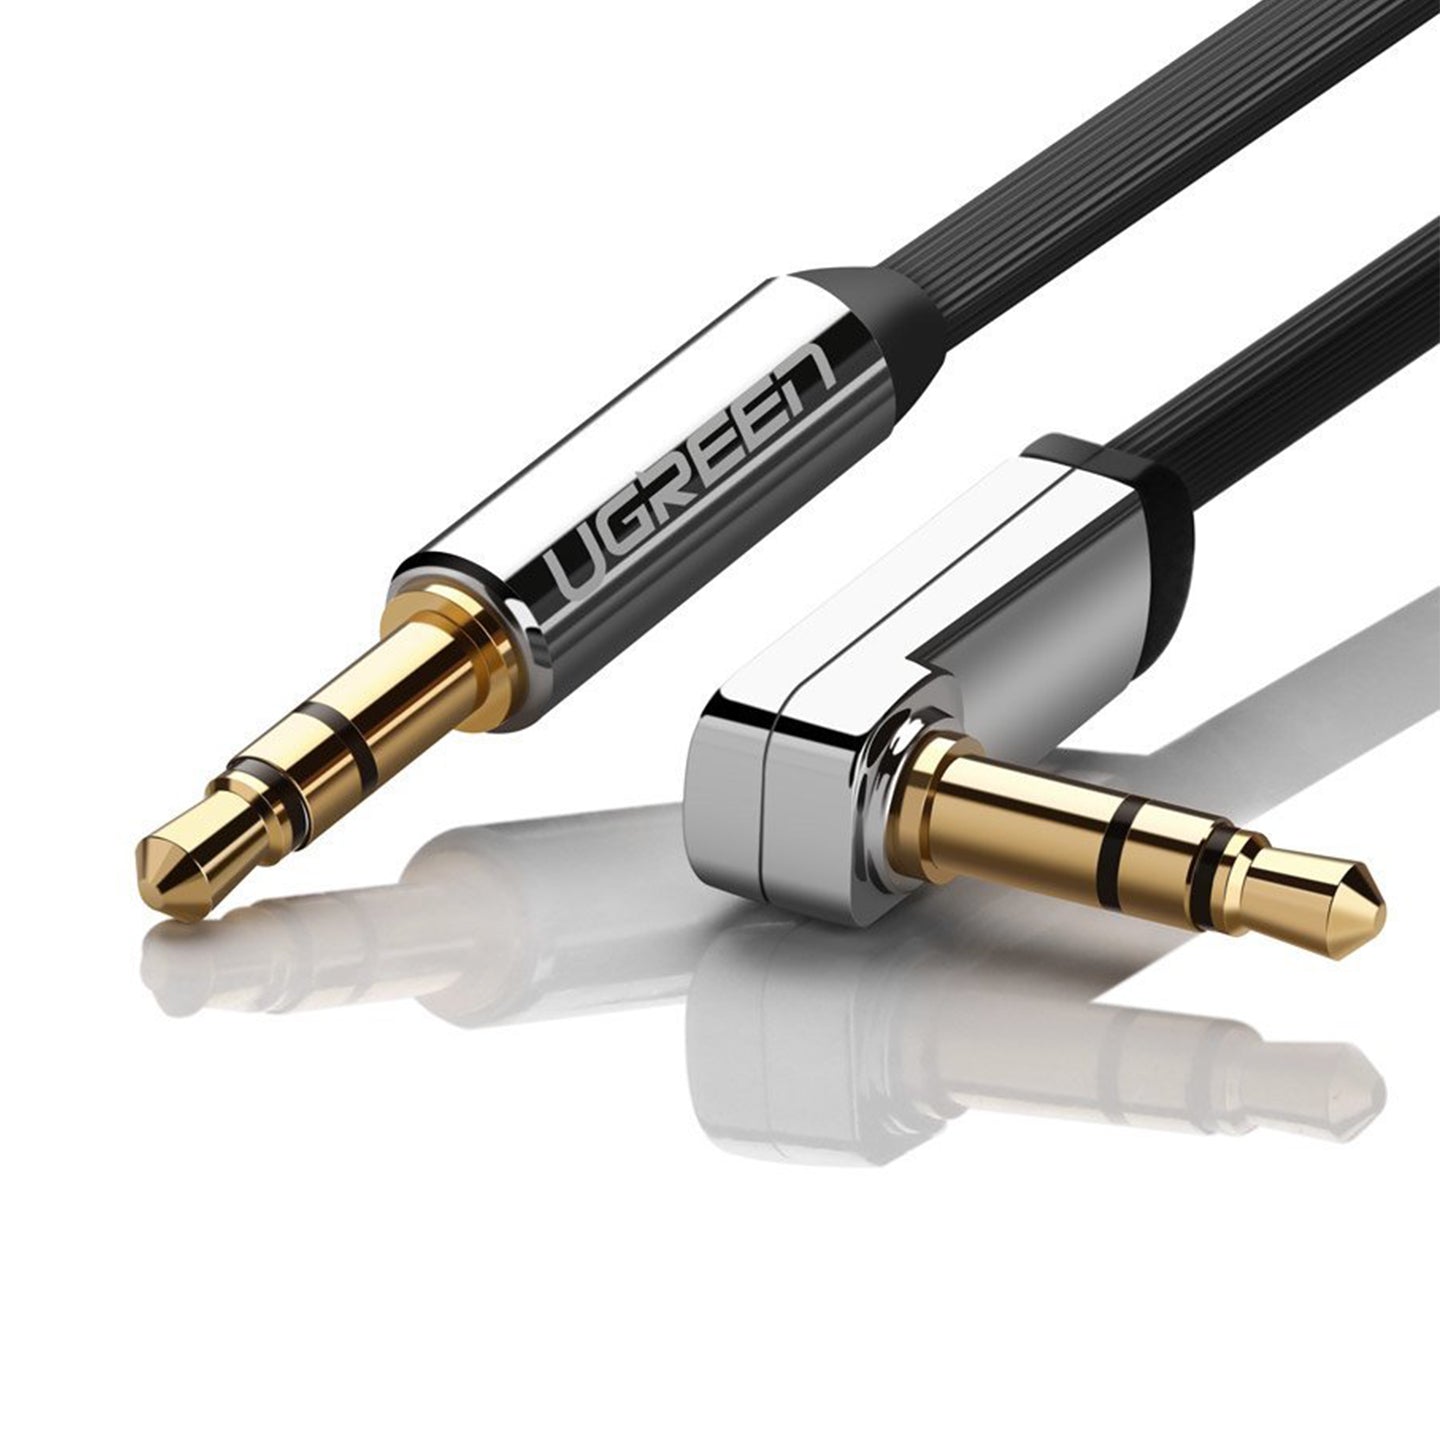 UGREEN 3.5mm Straight Male to 3.5mm Angled Male Gold-Plated Flat Audio AUX Cable for Smartphones, MP3, Tablets - Available in 0.5M, 1M, 1.5M, 2M, 3M,5M